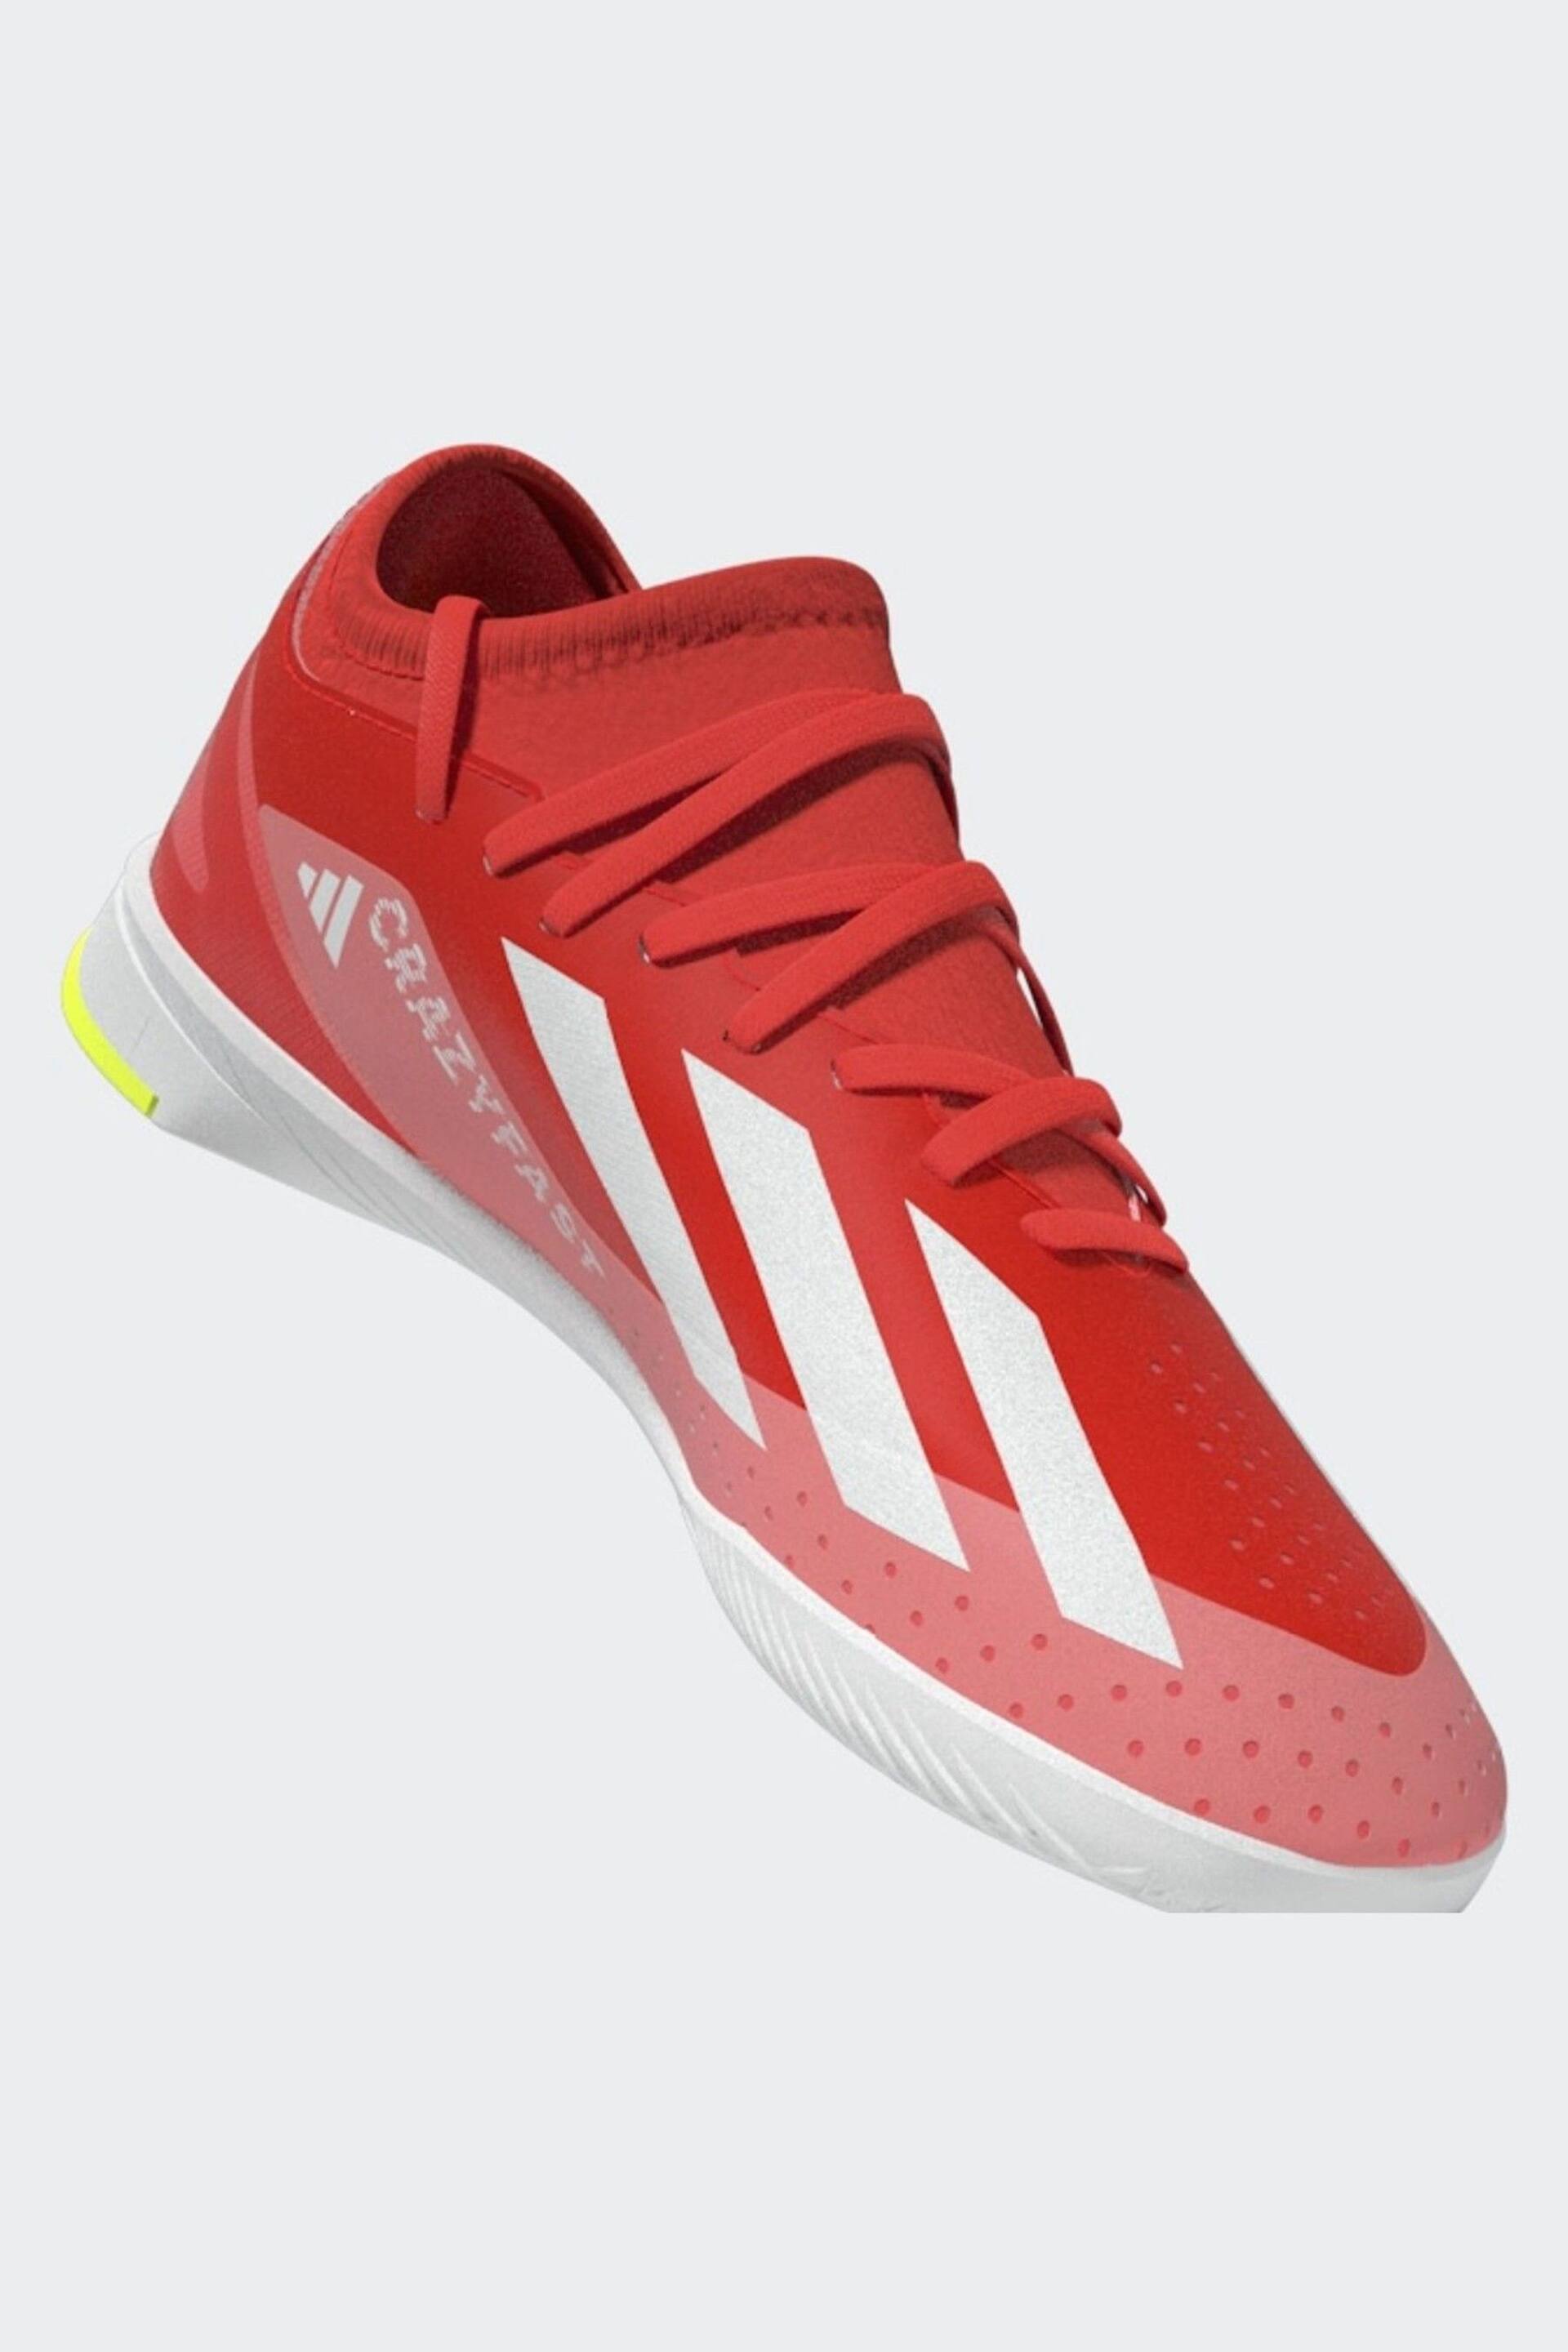 adidas Red/White Football X Crazyfast League Indoor Kids Boots - Image 8 of 20